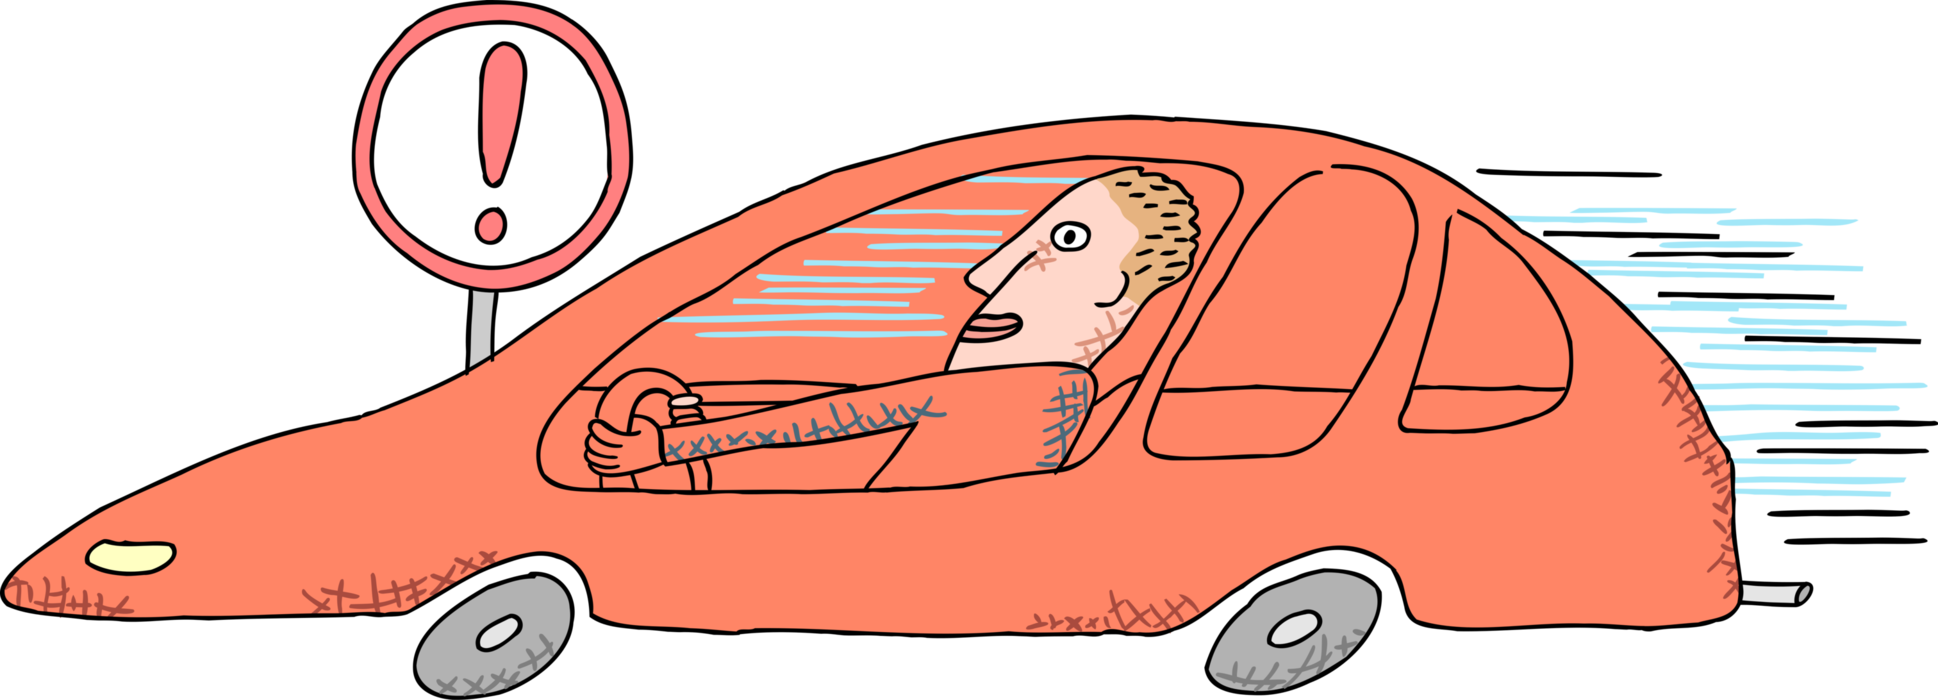 Vector Illustration of Distracted Motorist Driving Automobile Car Motor Vehicle on Highway or Road